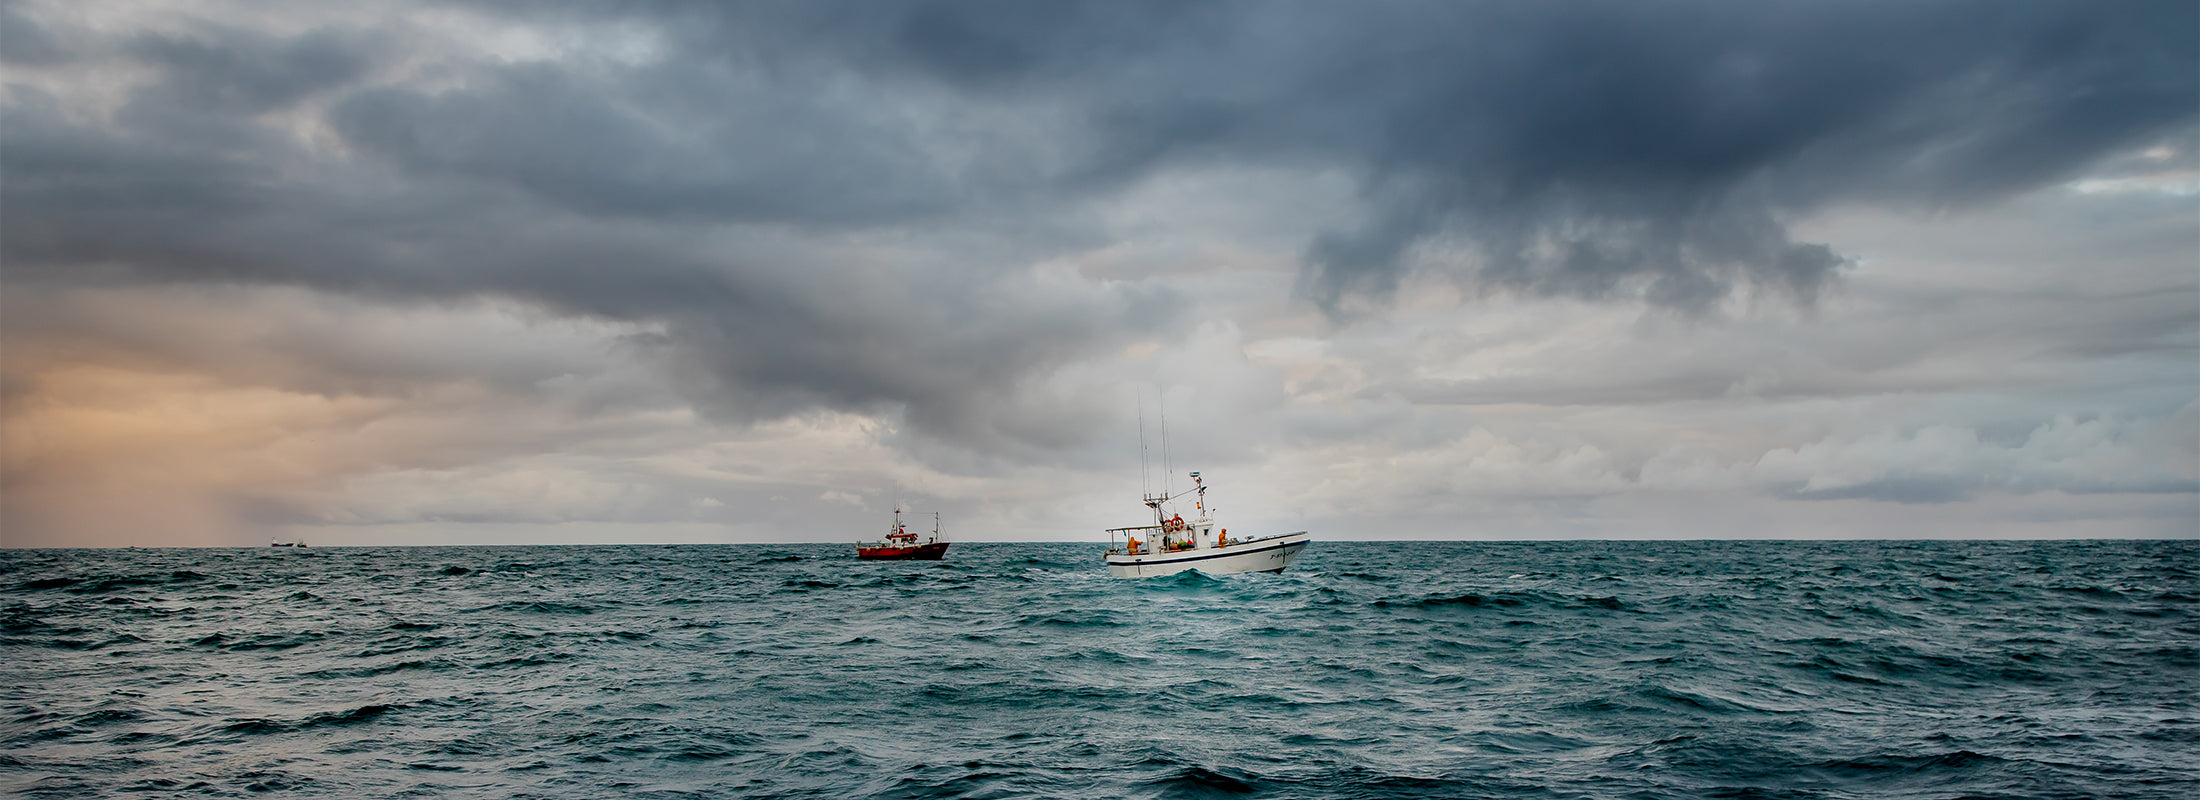 A mackerel fishing boat out at sea under a dramatic sky